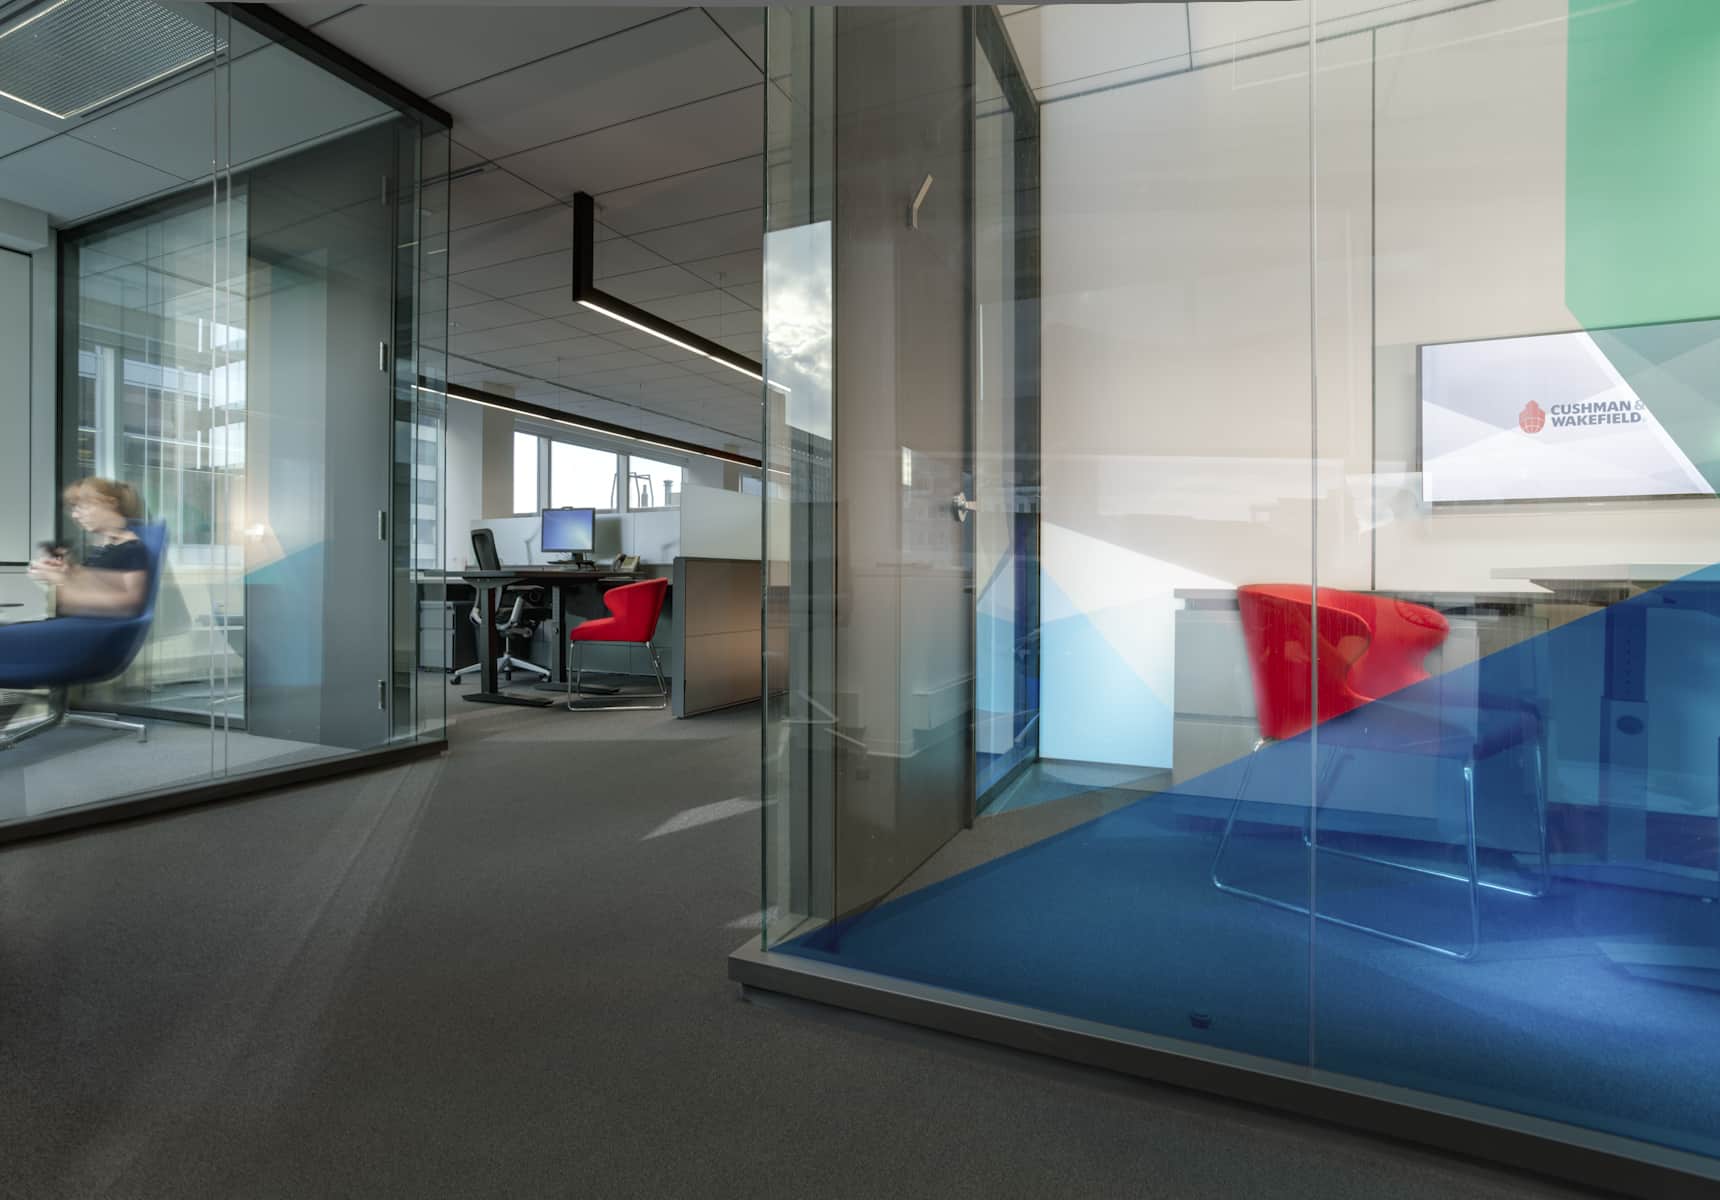 CUSHMAN WAKEFIELD OFFICES lemay architecture asd